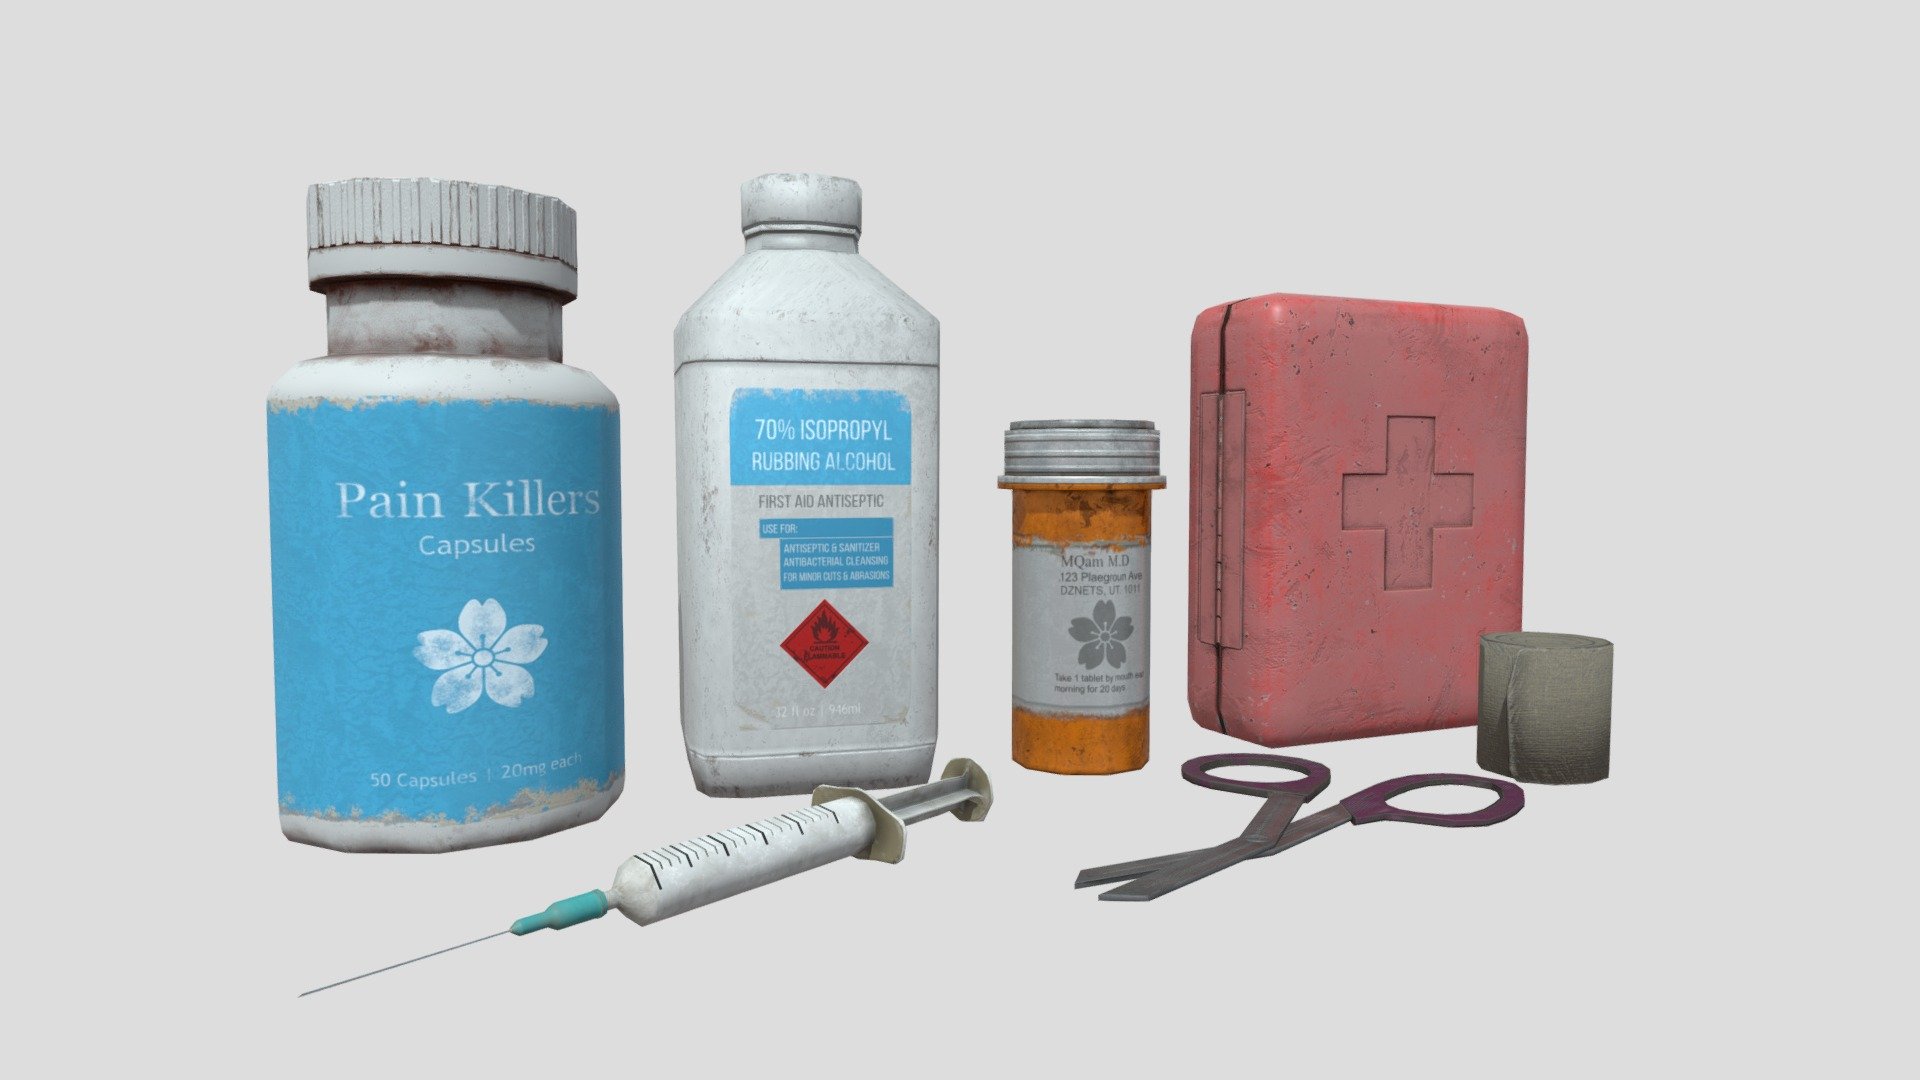 A set of game ready props! Perfect for adding detail to environments or as pickup objects.

Included:
* MedKit
* Syringe
* Capsule Bottle
* Bandage Wrap
* Medical Scissors
* Perscription Bottle
* Rubbing Alcohol Bottle

Technical Info
1k Texture Maps
Total Tris: 2172 - Health - Low Poly Game Assets - Buy Royalty Free 3D model by Mohammed Qamar (@moqam) 3d model